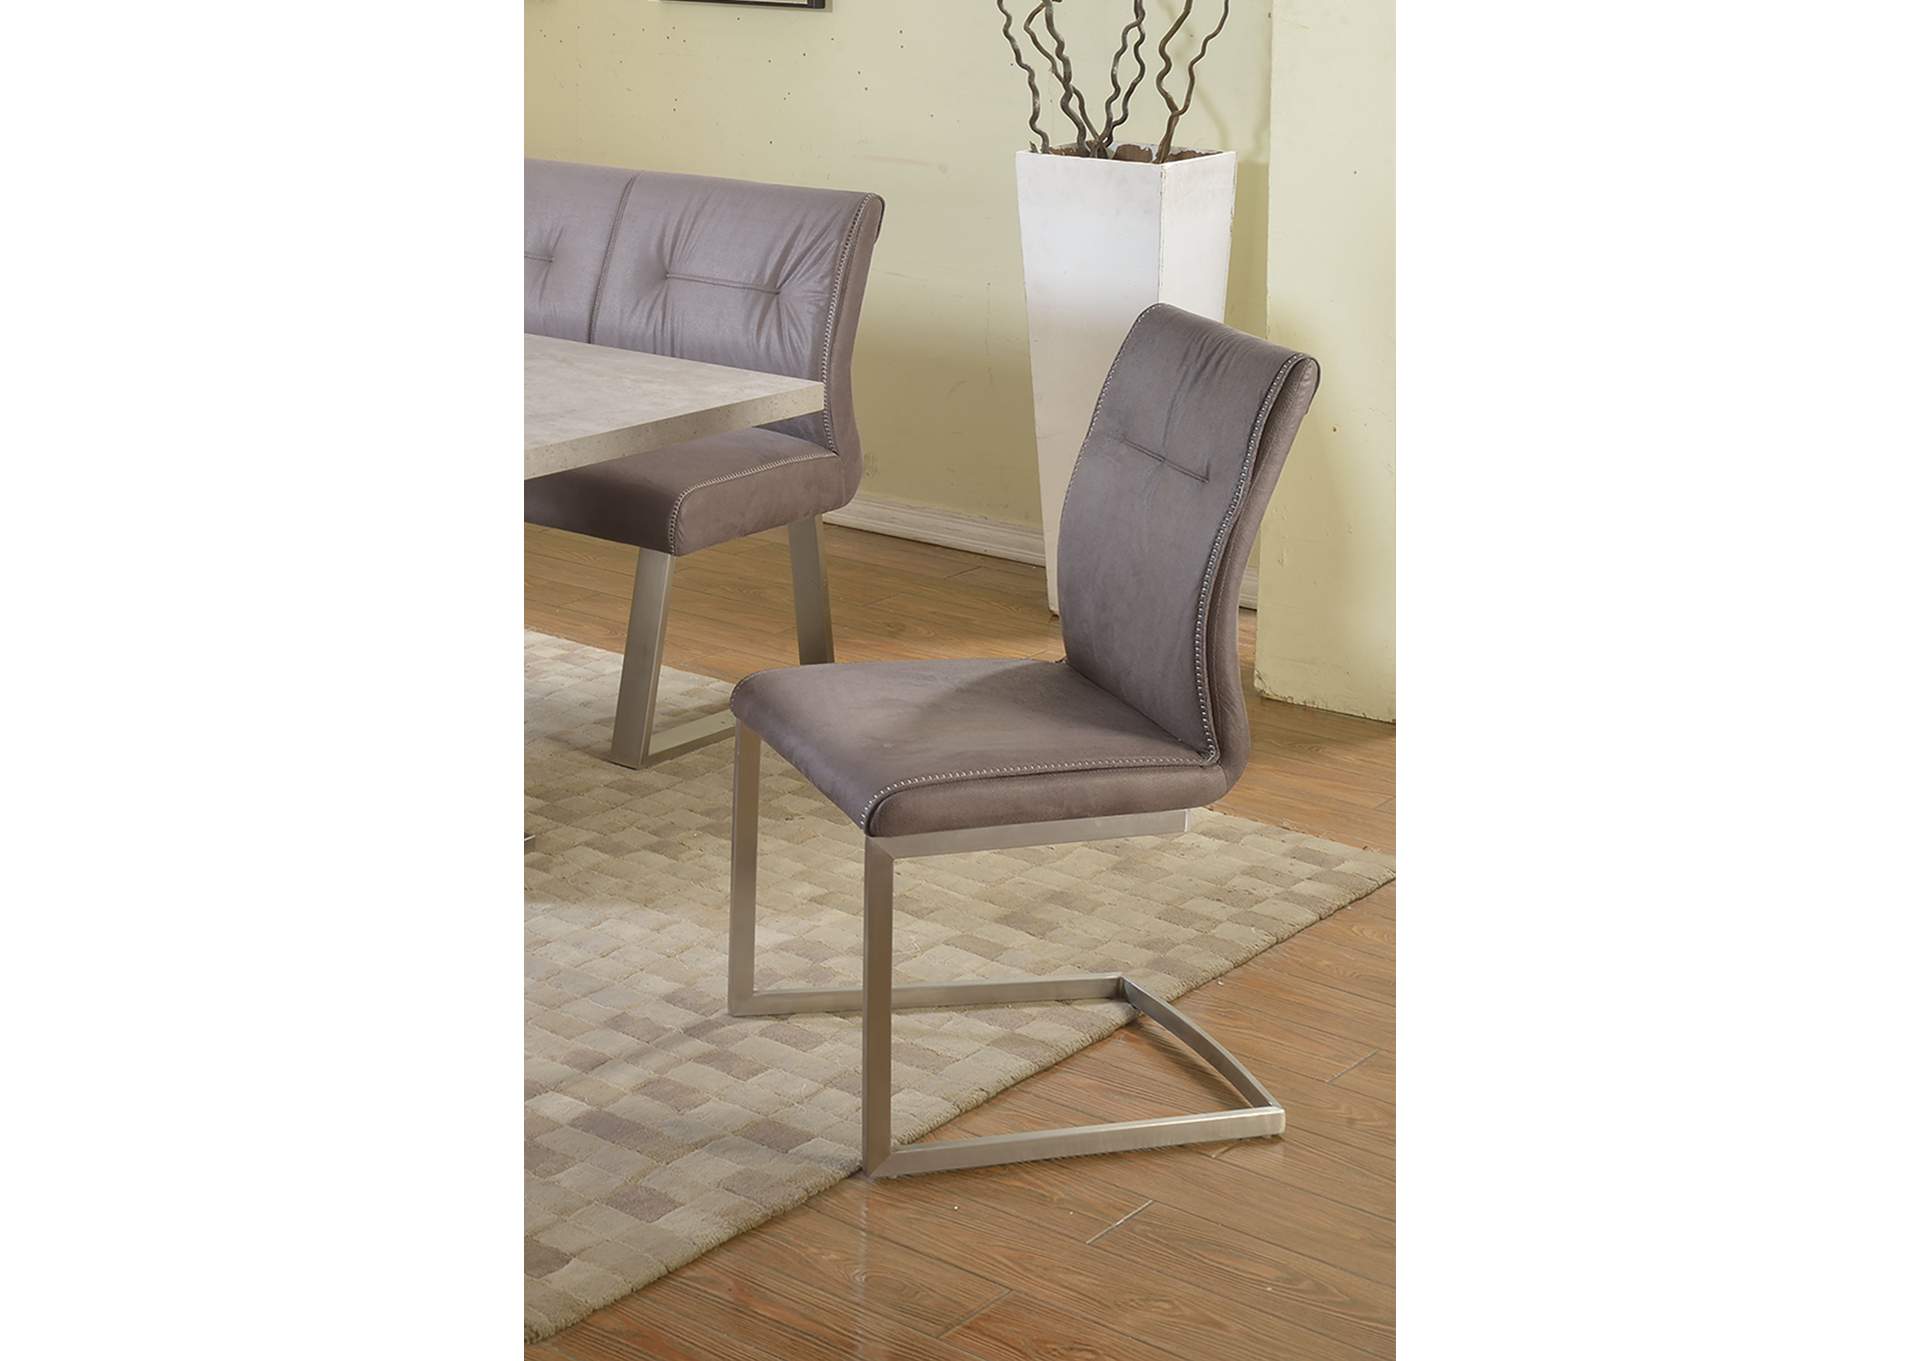 Contemporary Cantilever Side Chair w/ Highlight Stitching,Chintaly Imports